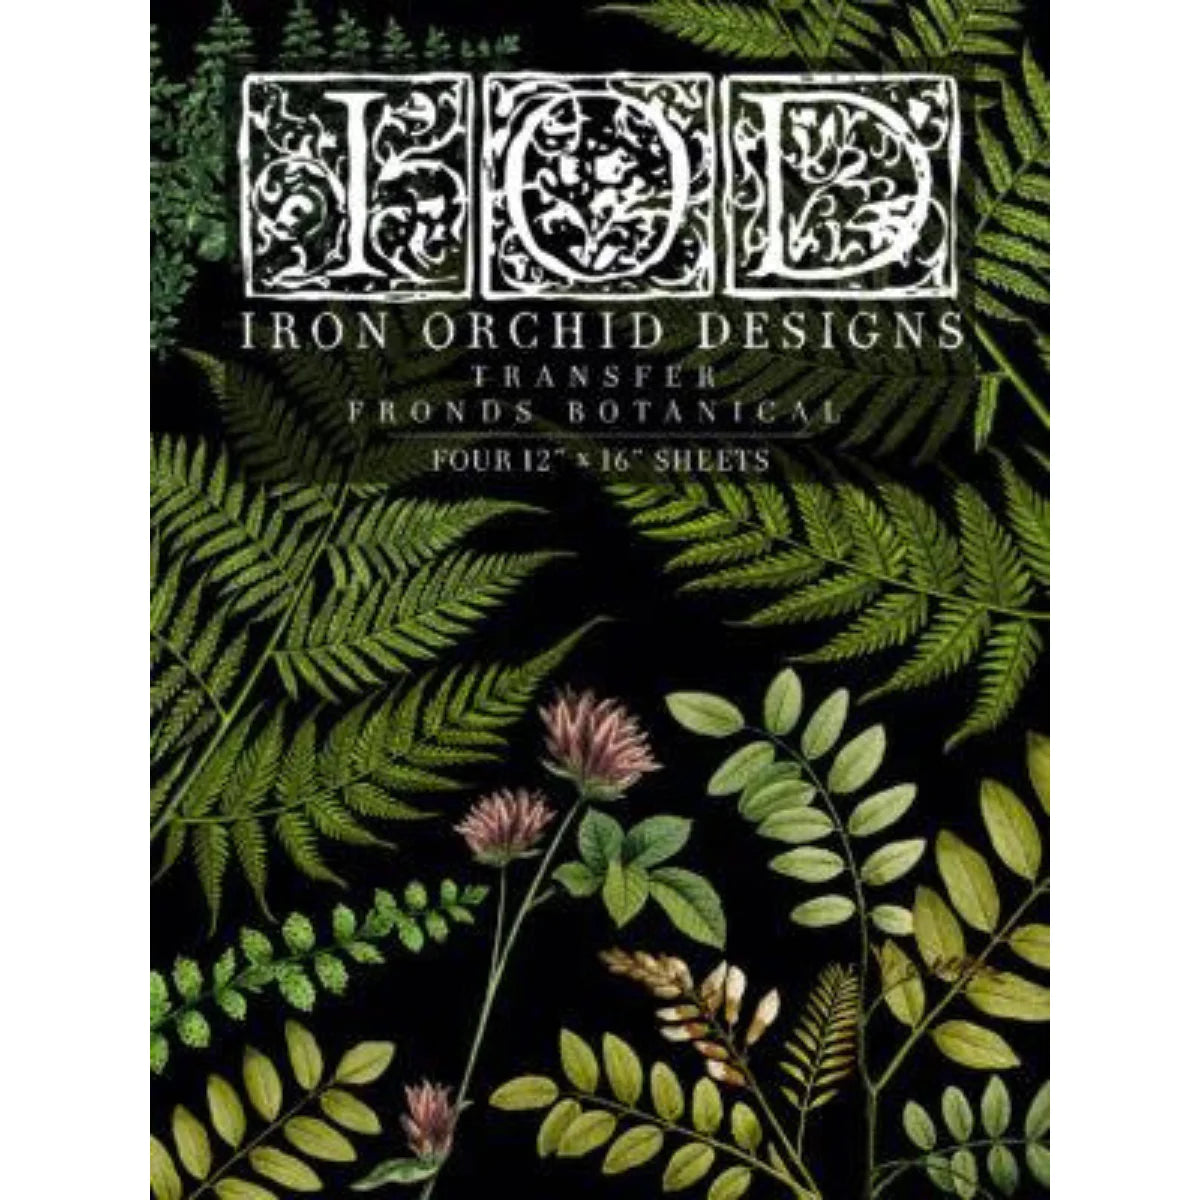 Iron Orchid Designs Transfers Fronds Botanical